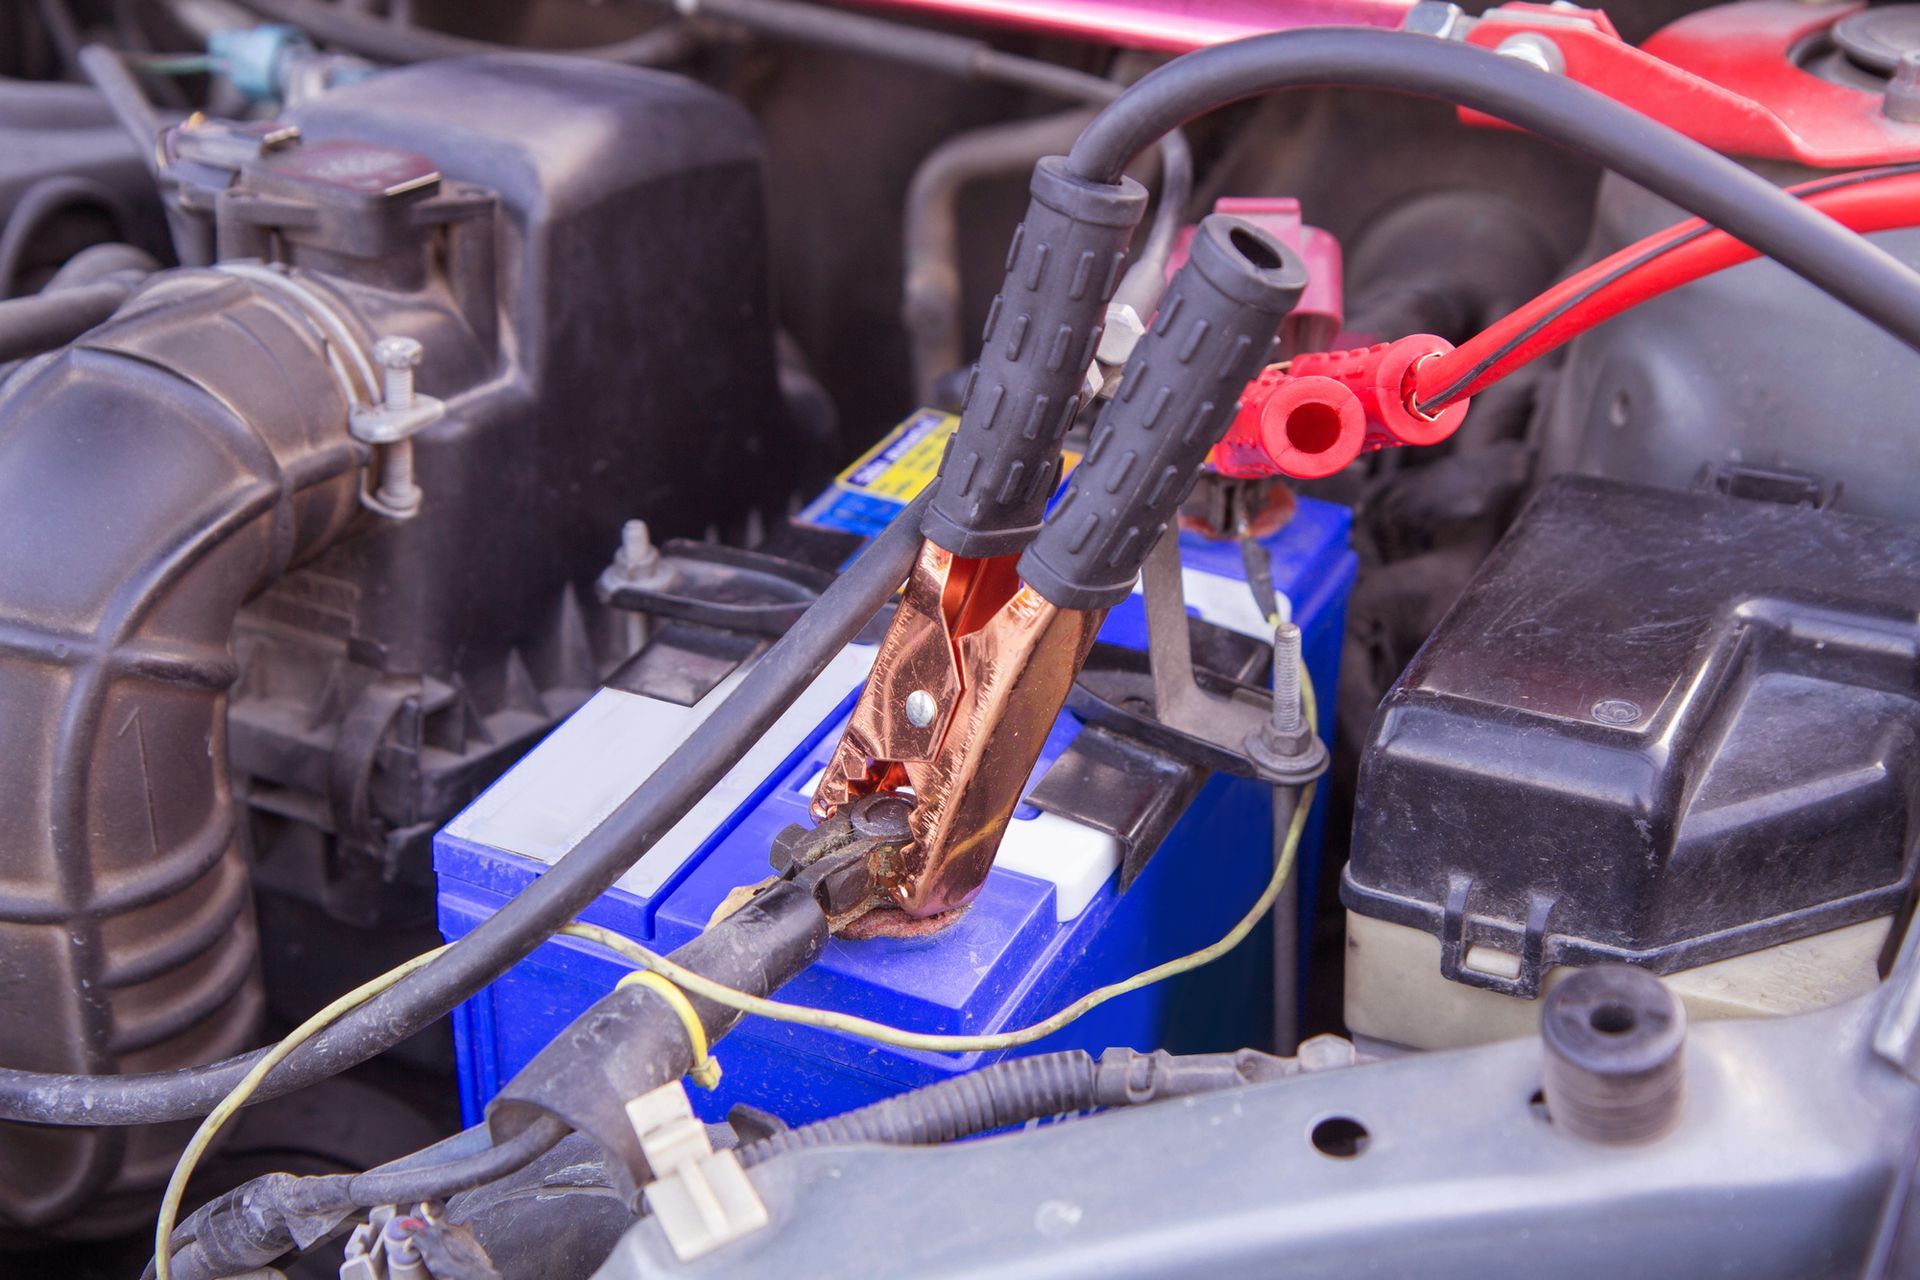 A car battery is being charged with jumper cables.